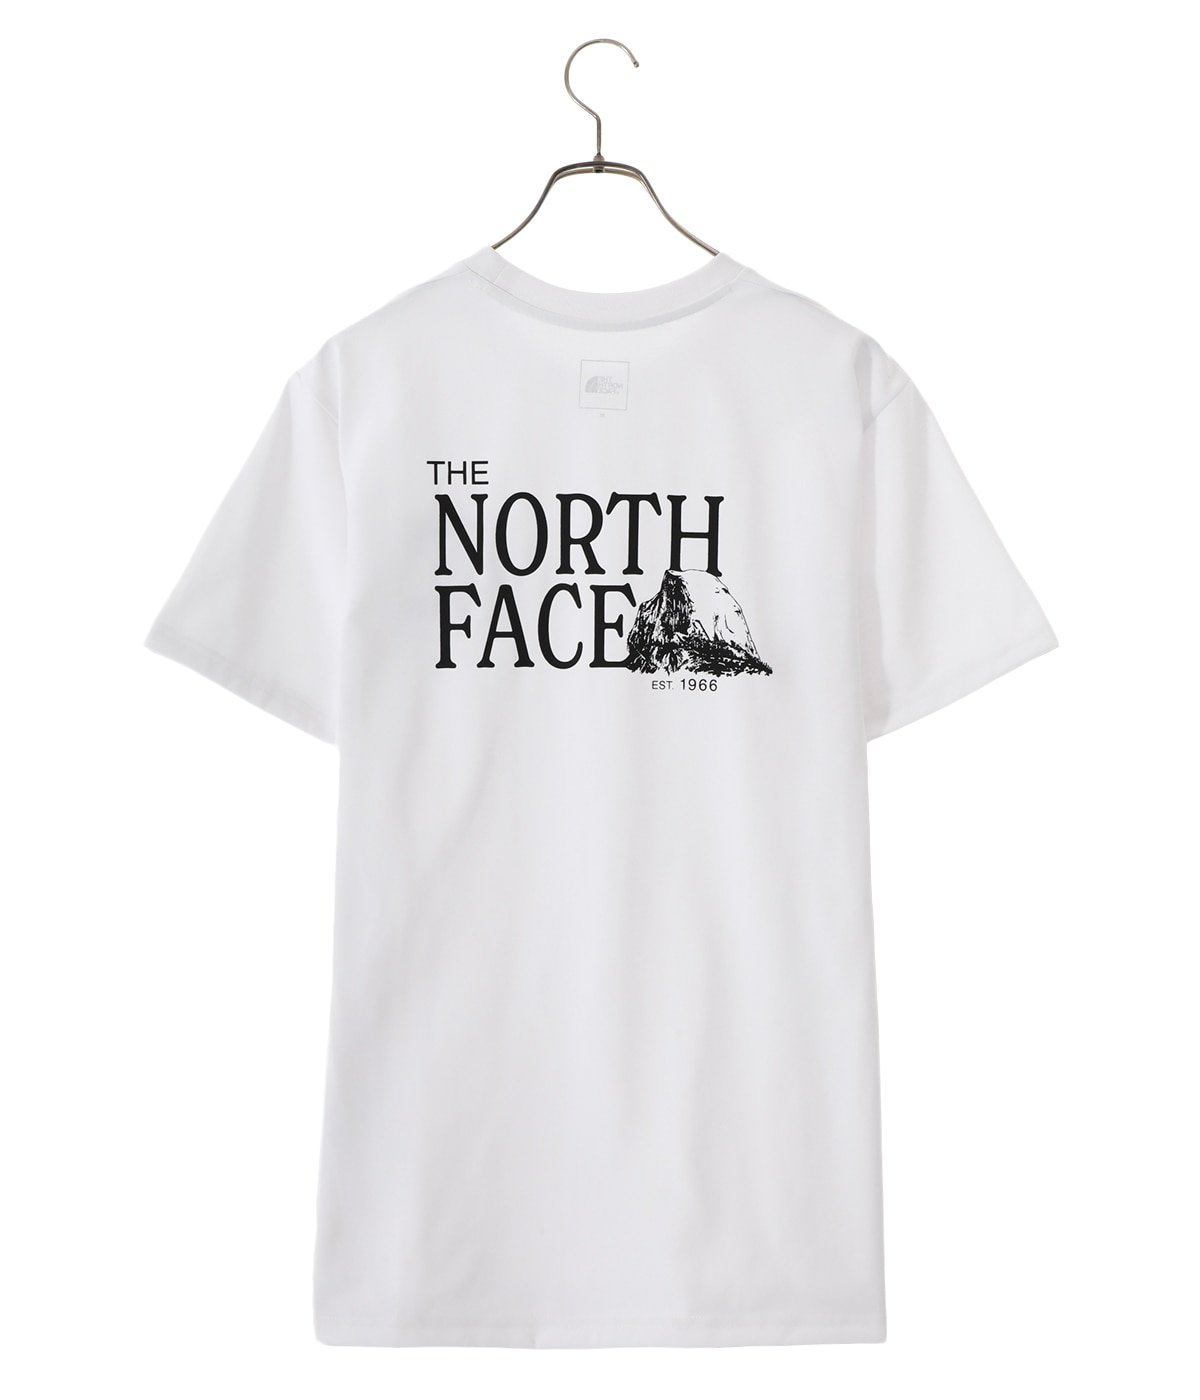 S/S Half Dome Two Graphics Tee THE NORTH FACE(ザ ノースフェイス) トップス  カットソー半袖・Tシャツ (メンズ)の通販 ARKnets(アークネッツ) 公式通販 【正規取扱店】